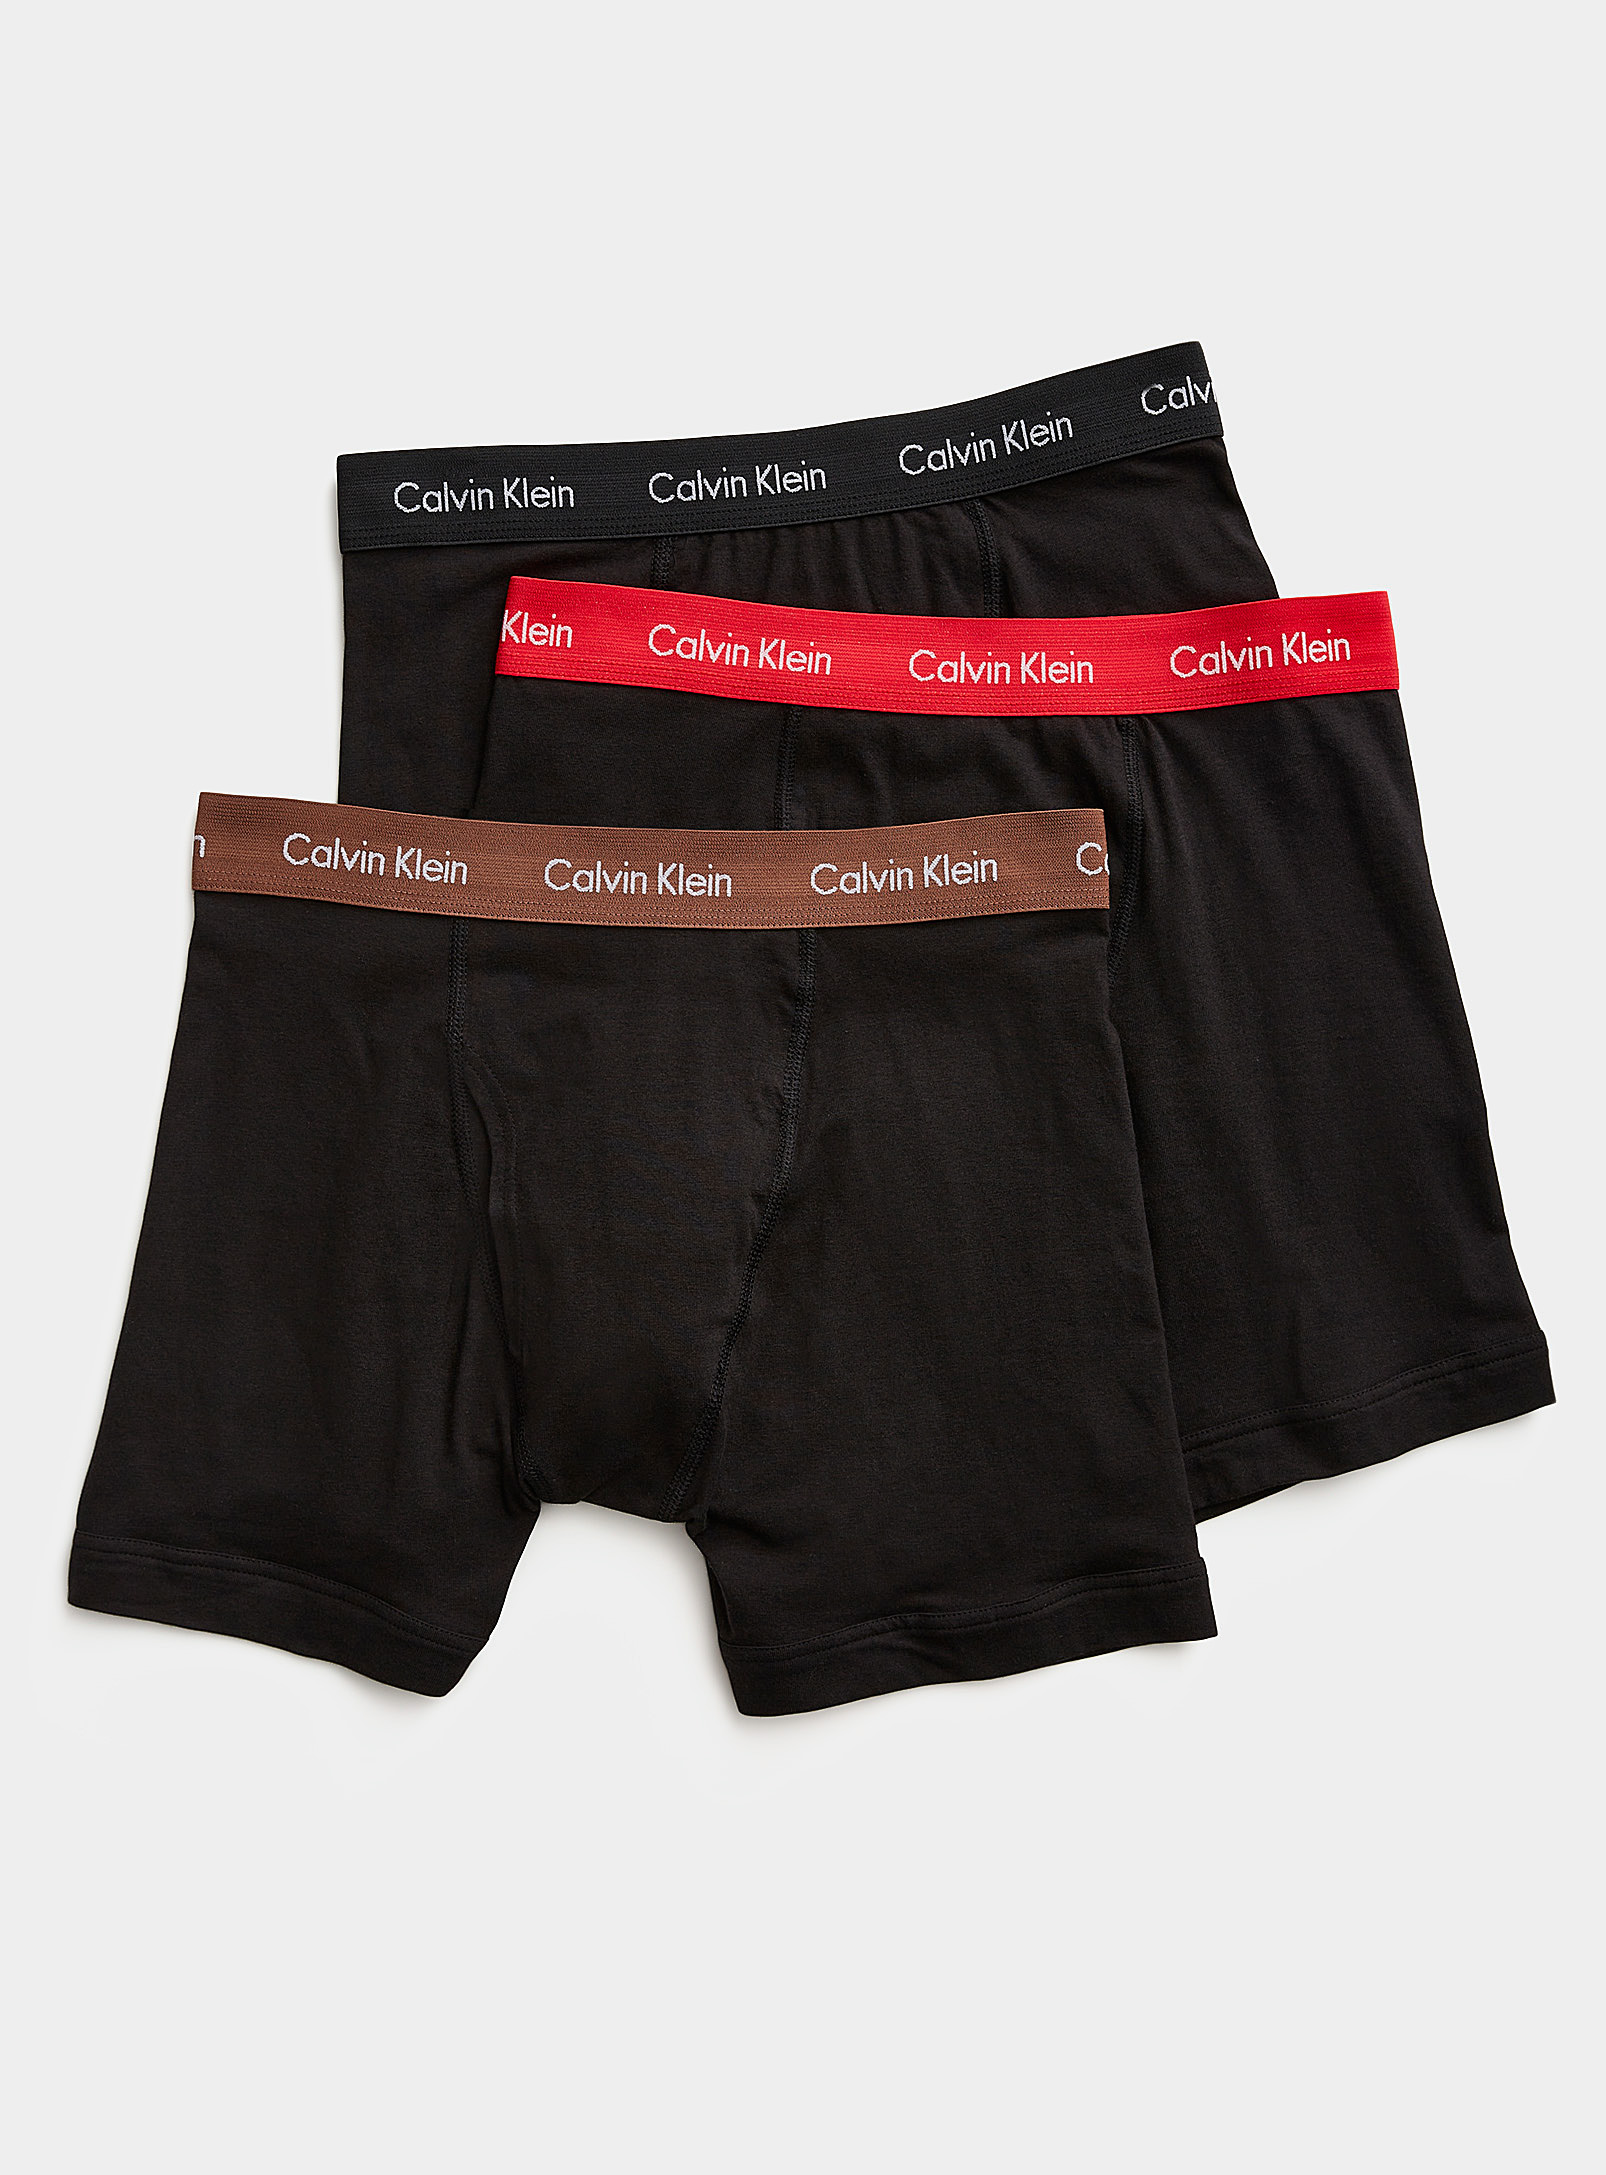 Dri-FIT Everyday pop band boxer briefs 3-pack